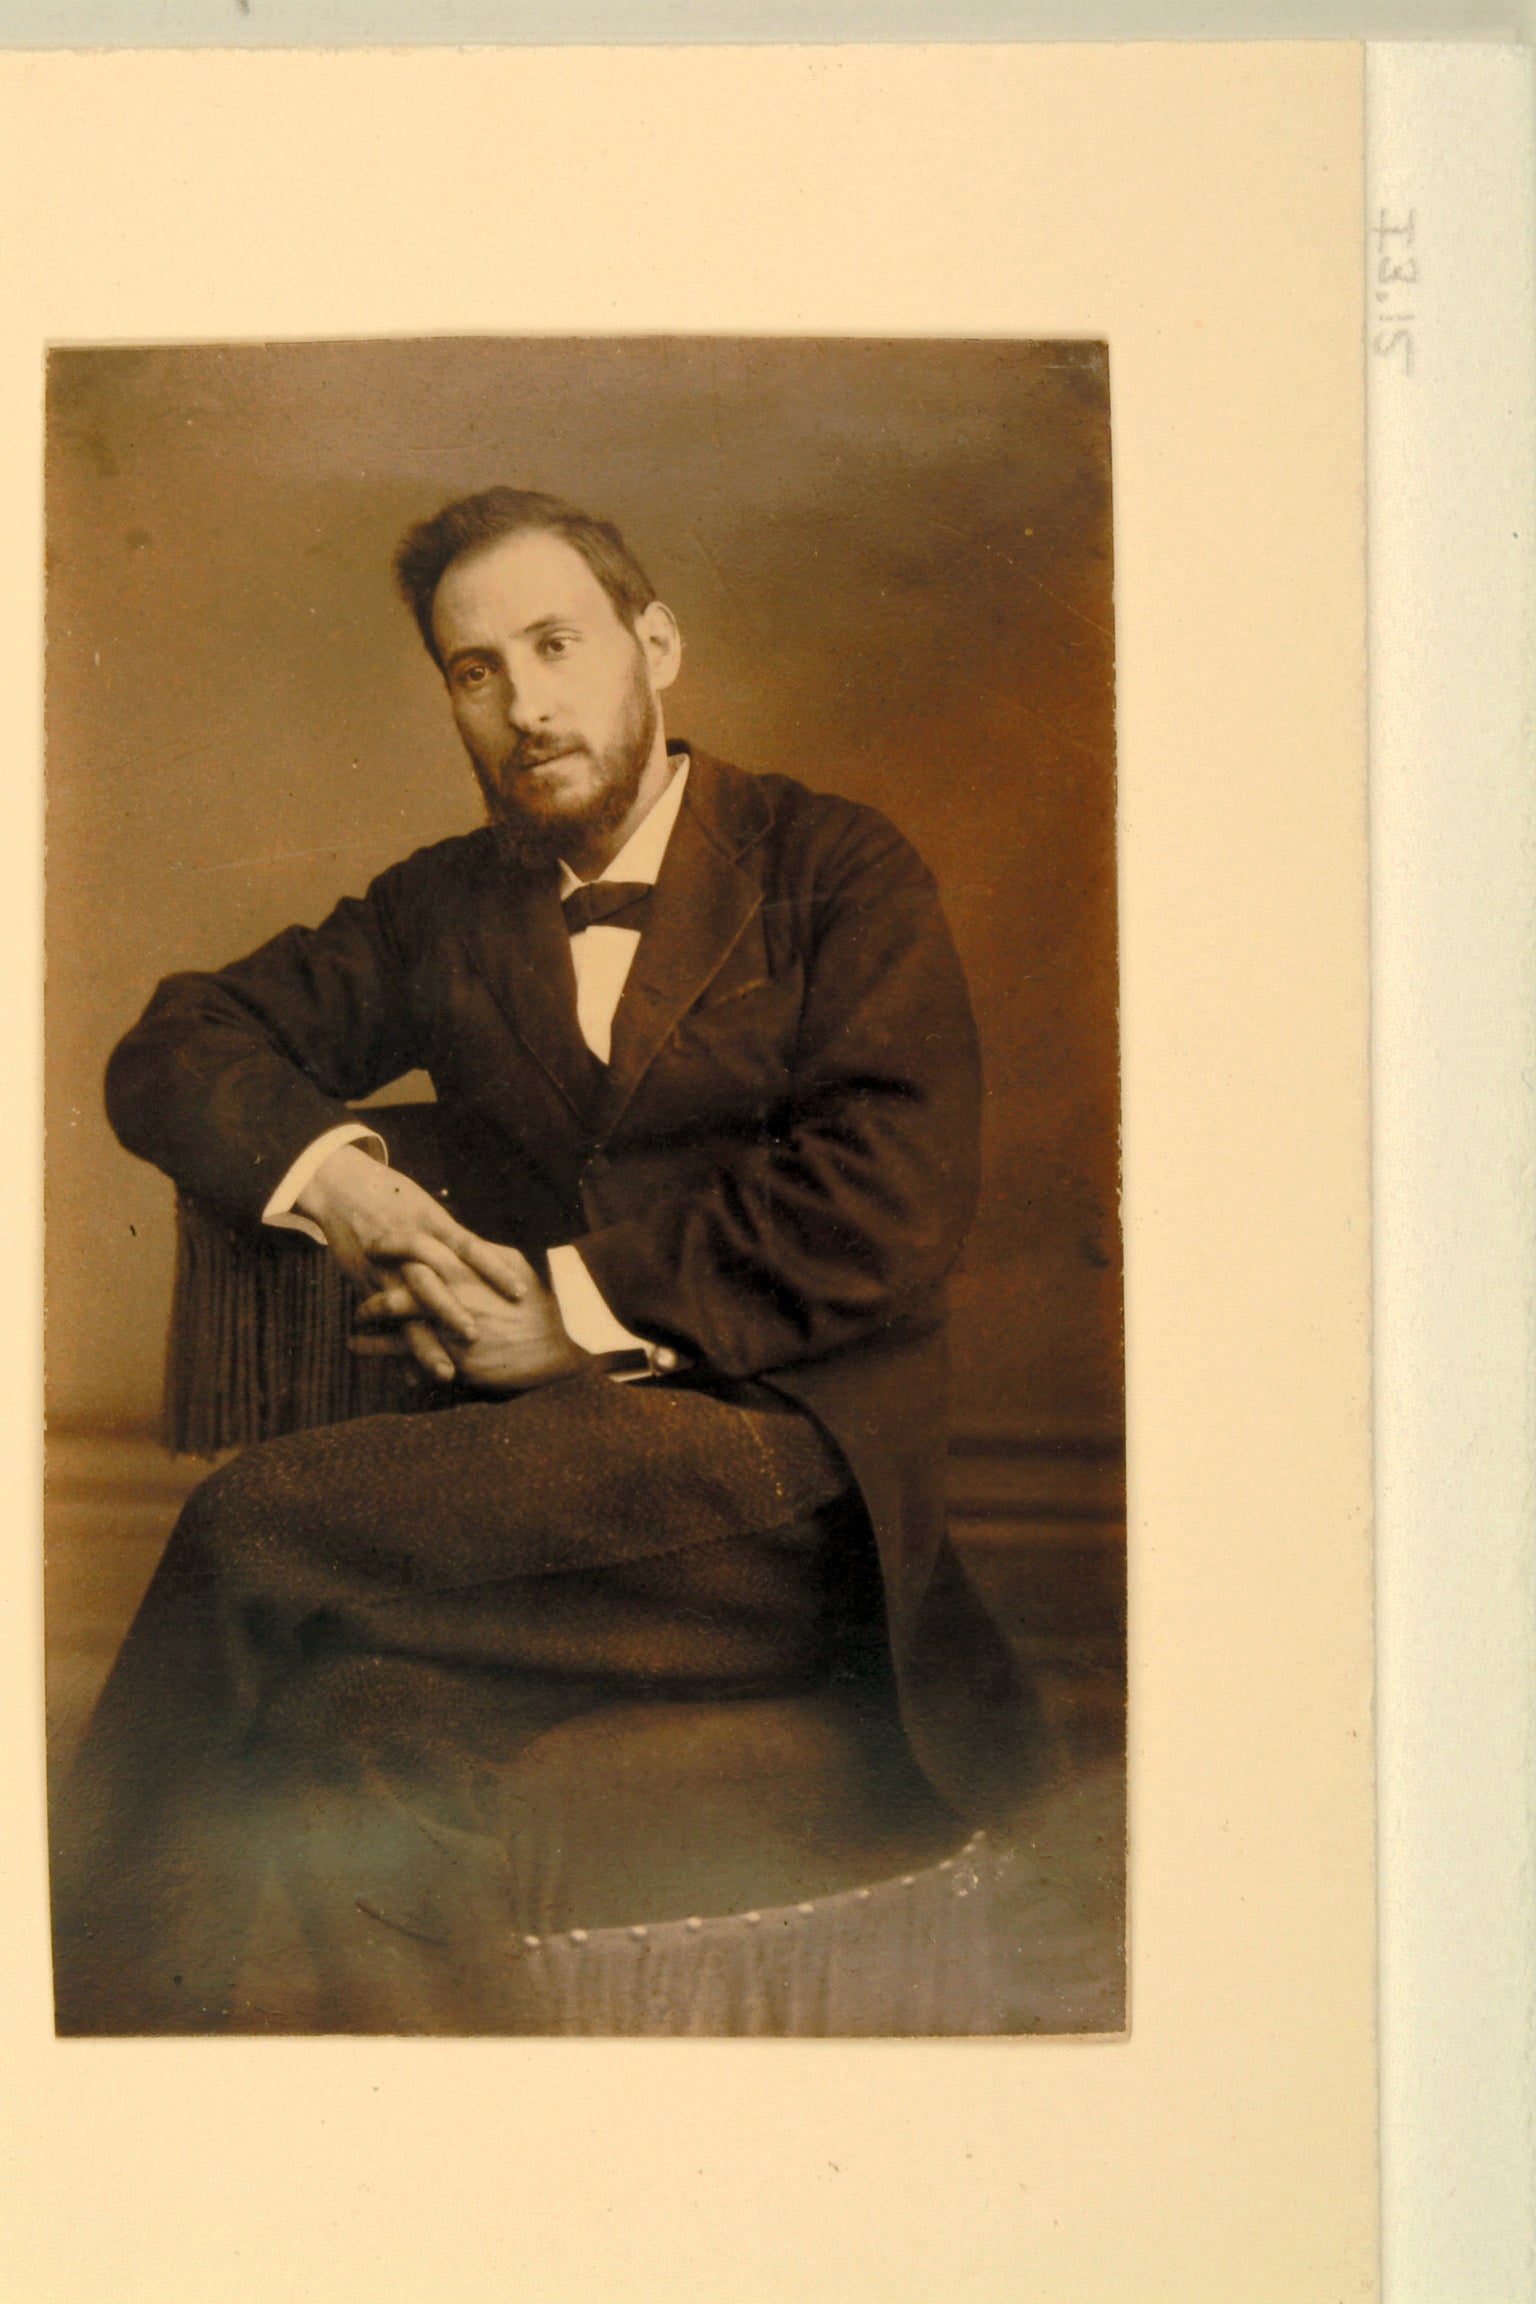 A young cajal appears in an 1871 photographic portrait. 